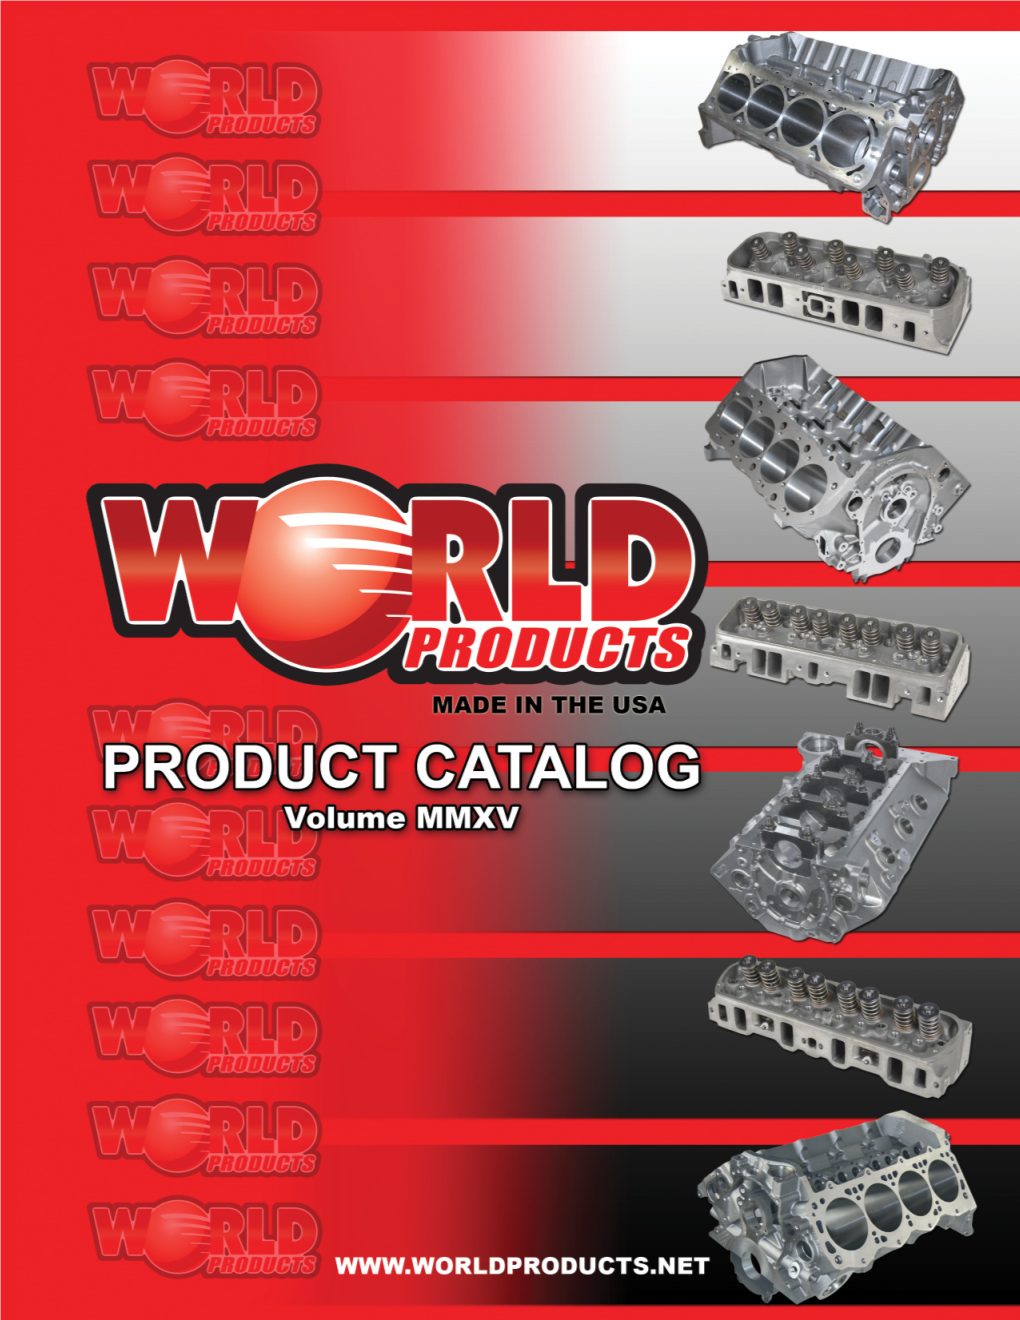 WORLD Products